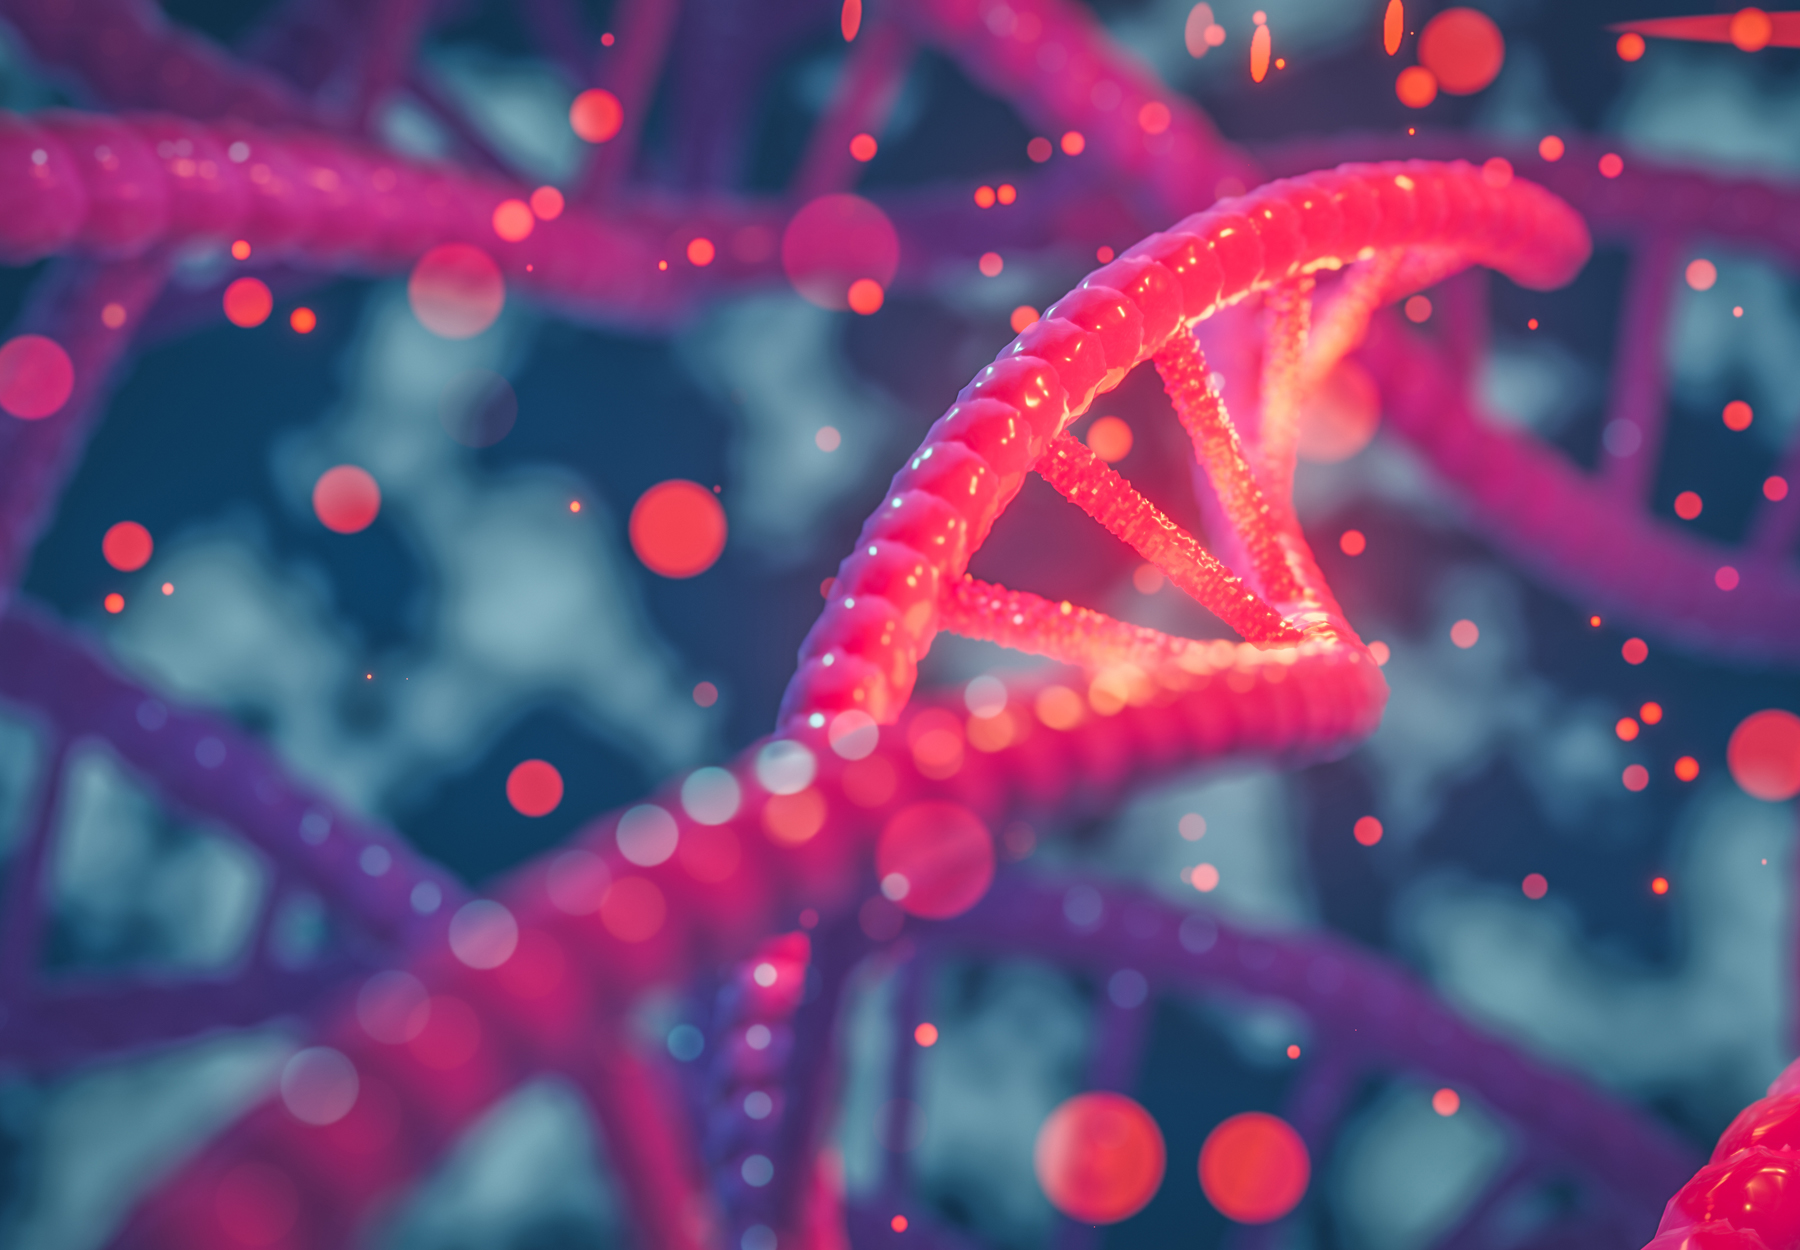 Illustration of DNA and particles in red on a blue-grey-teal background to show the concept of life science company mergers and acquisitions. Stock image.